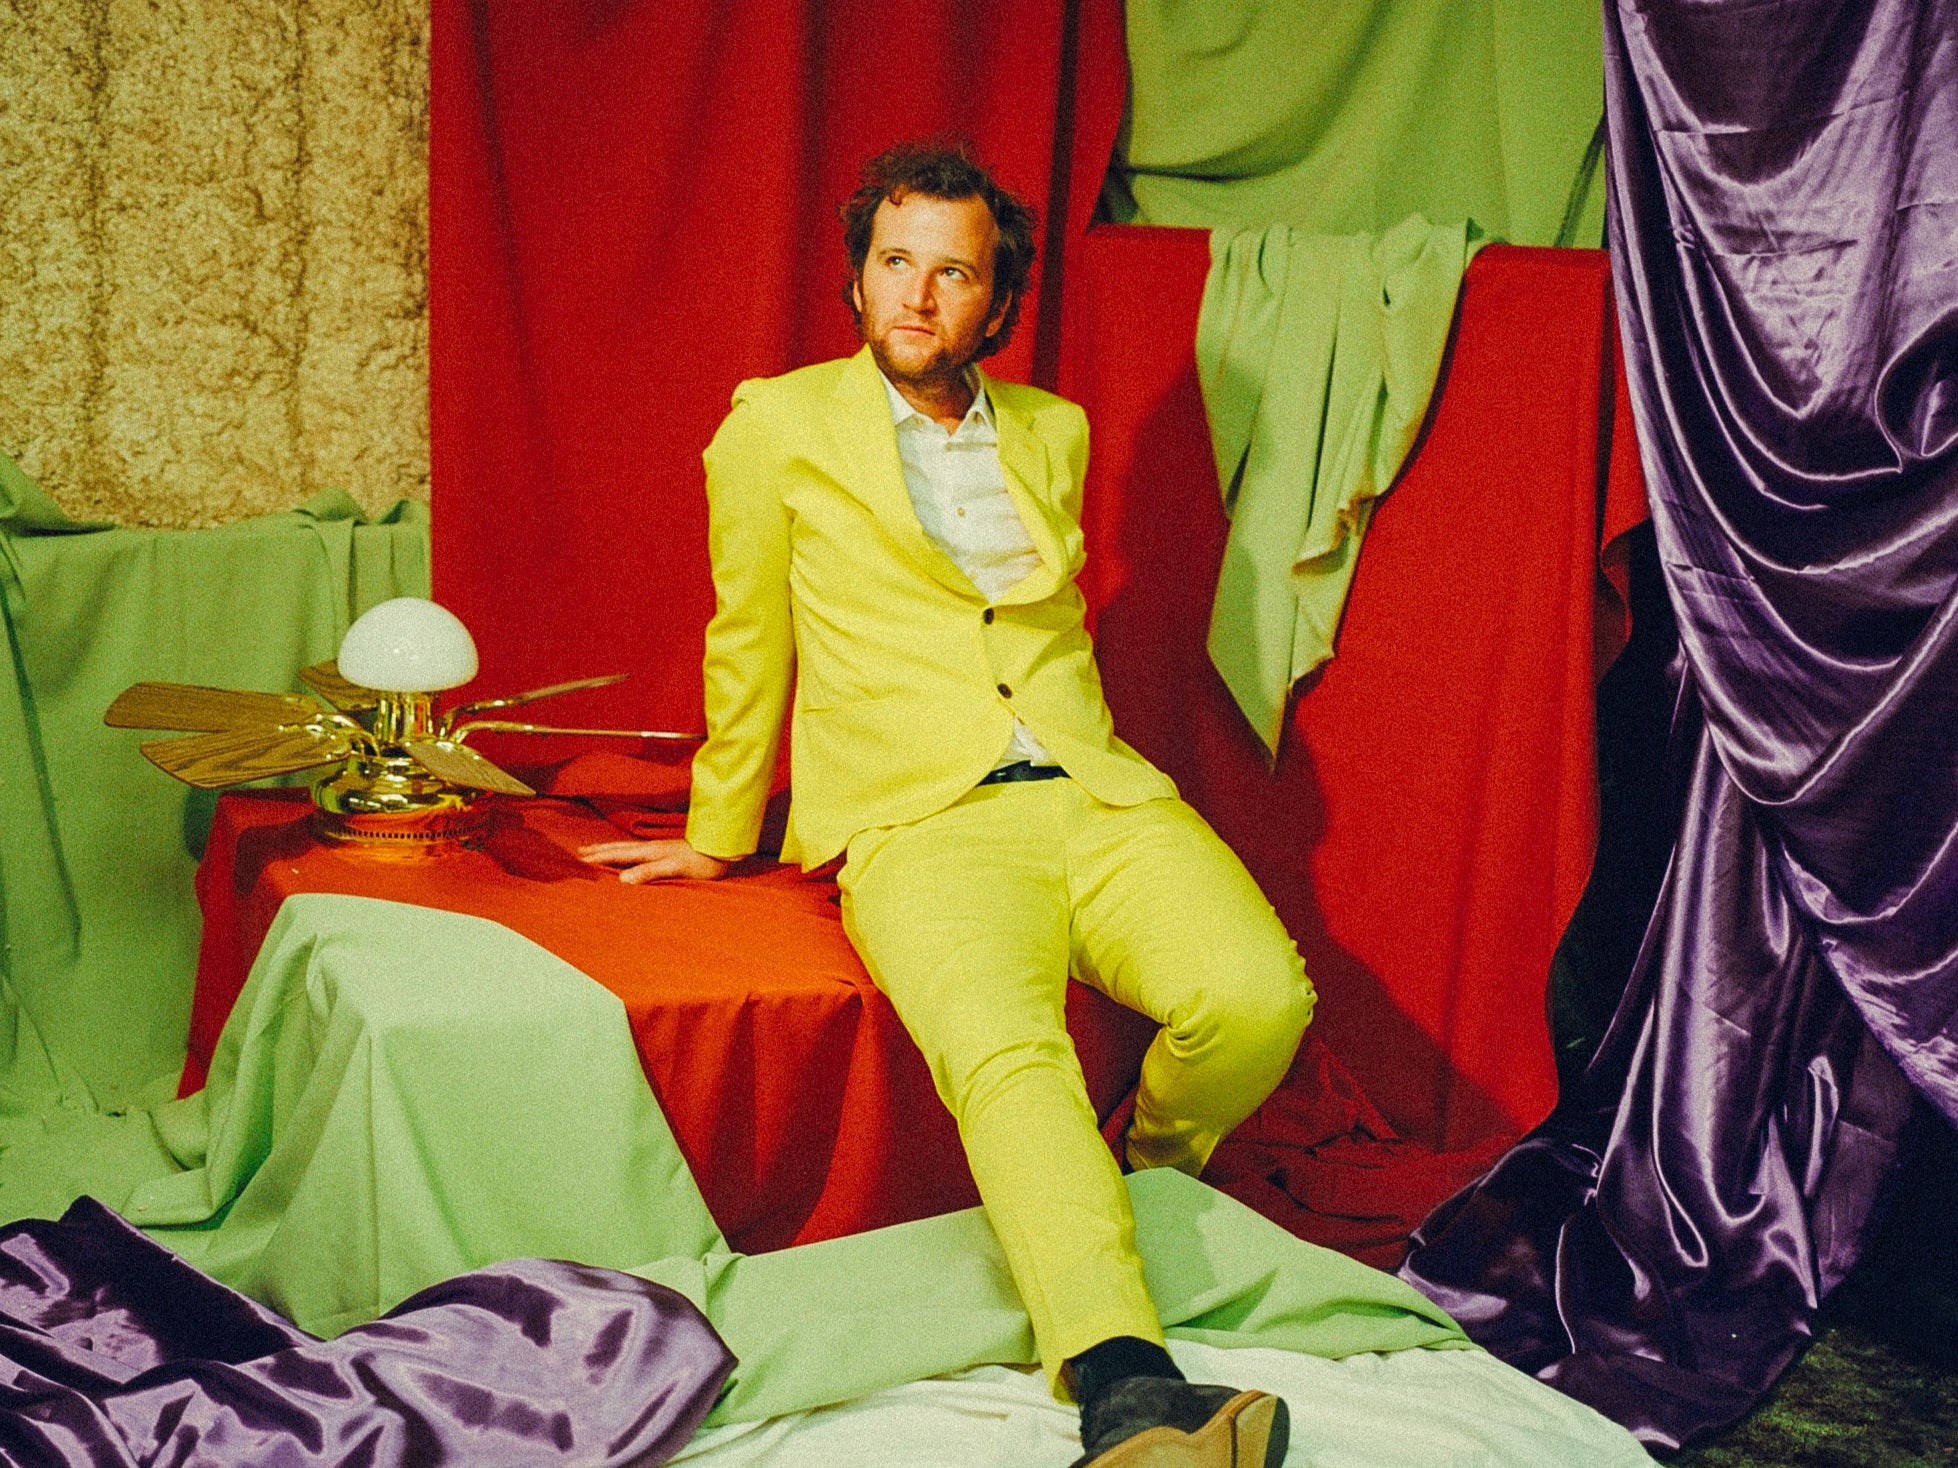 Chris Baio: 'I started making this record imagining extreme situations and what you as an individual can do’